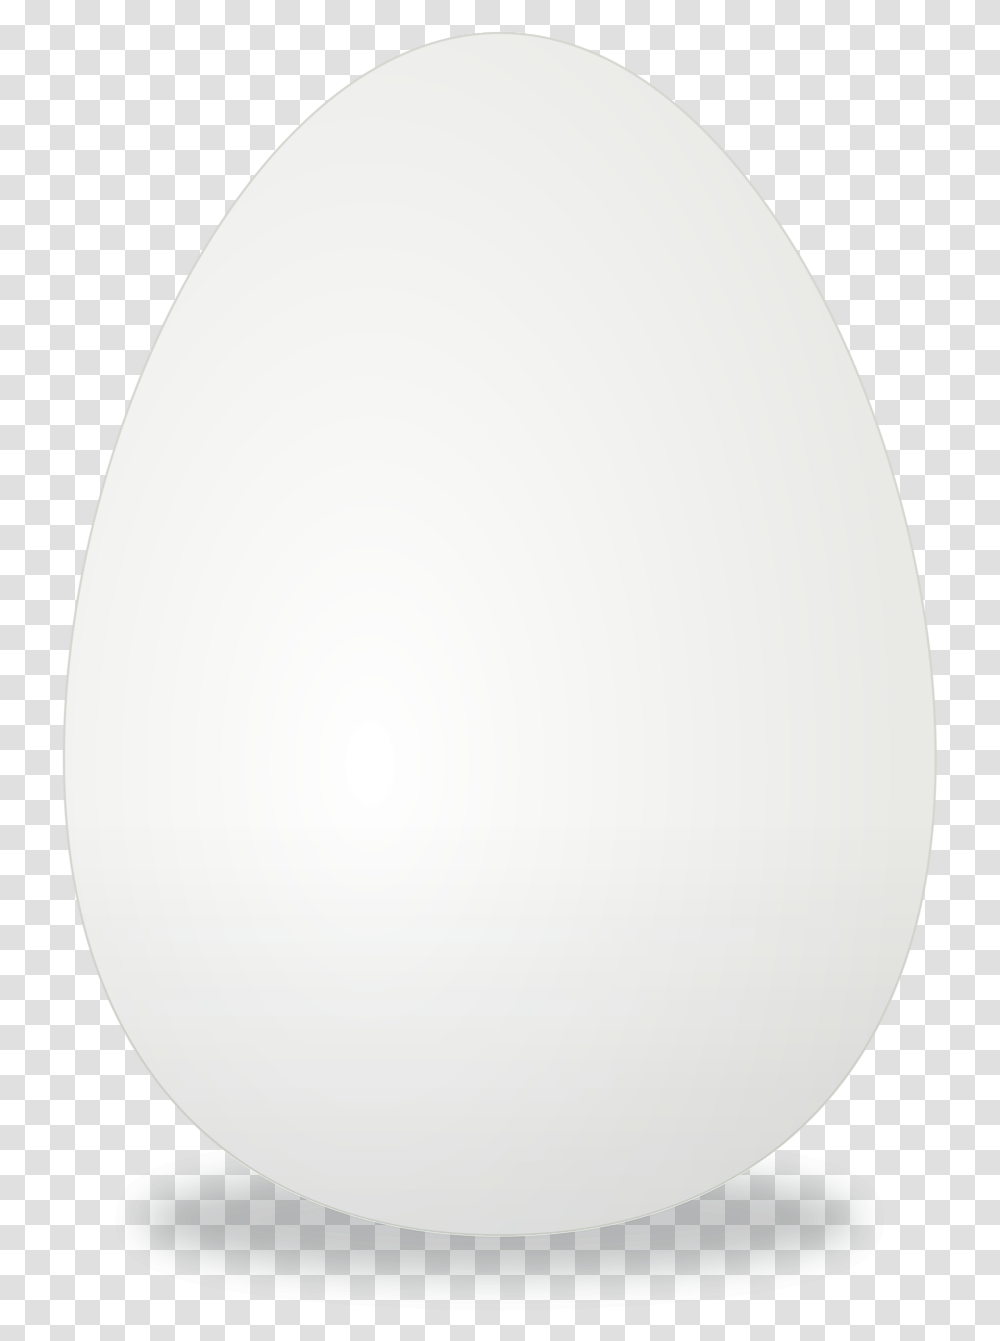 Eggs Image For Free Download White Egg, Food, Easter Egg, Balloon Transparent Png